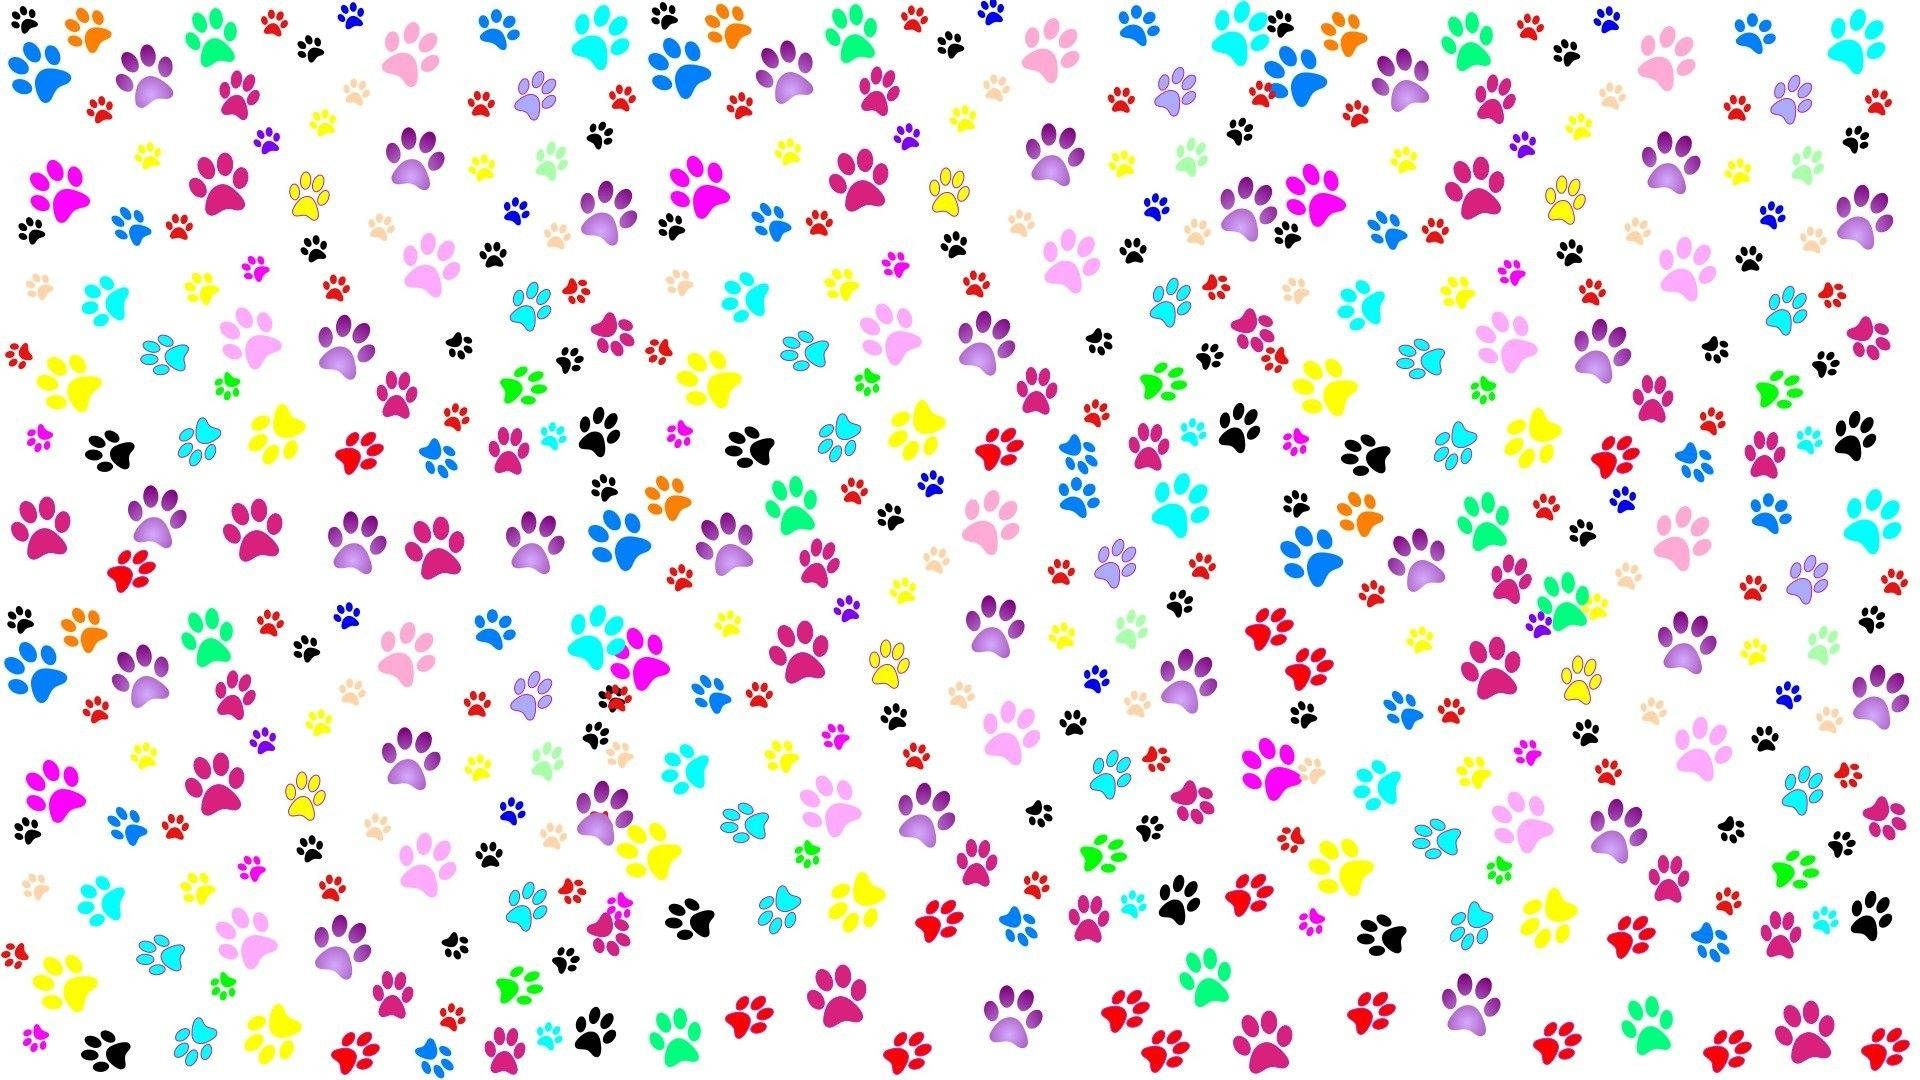 Colorful Paw Print Patterns Background